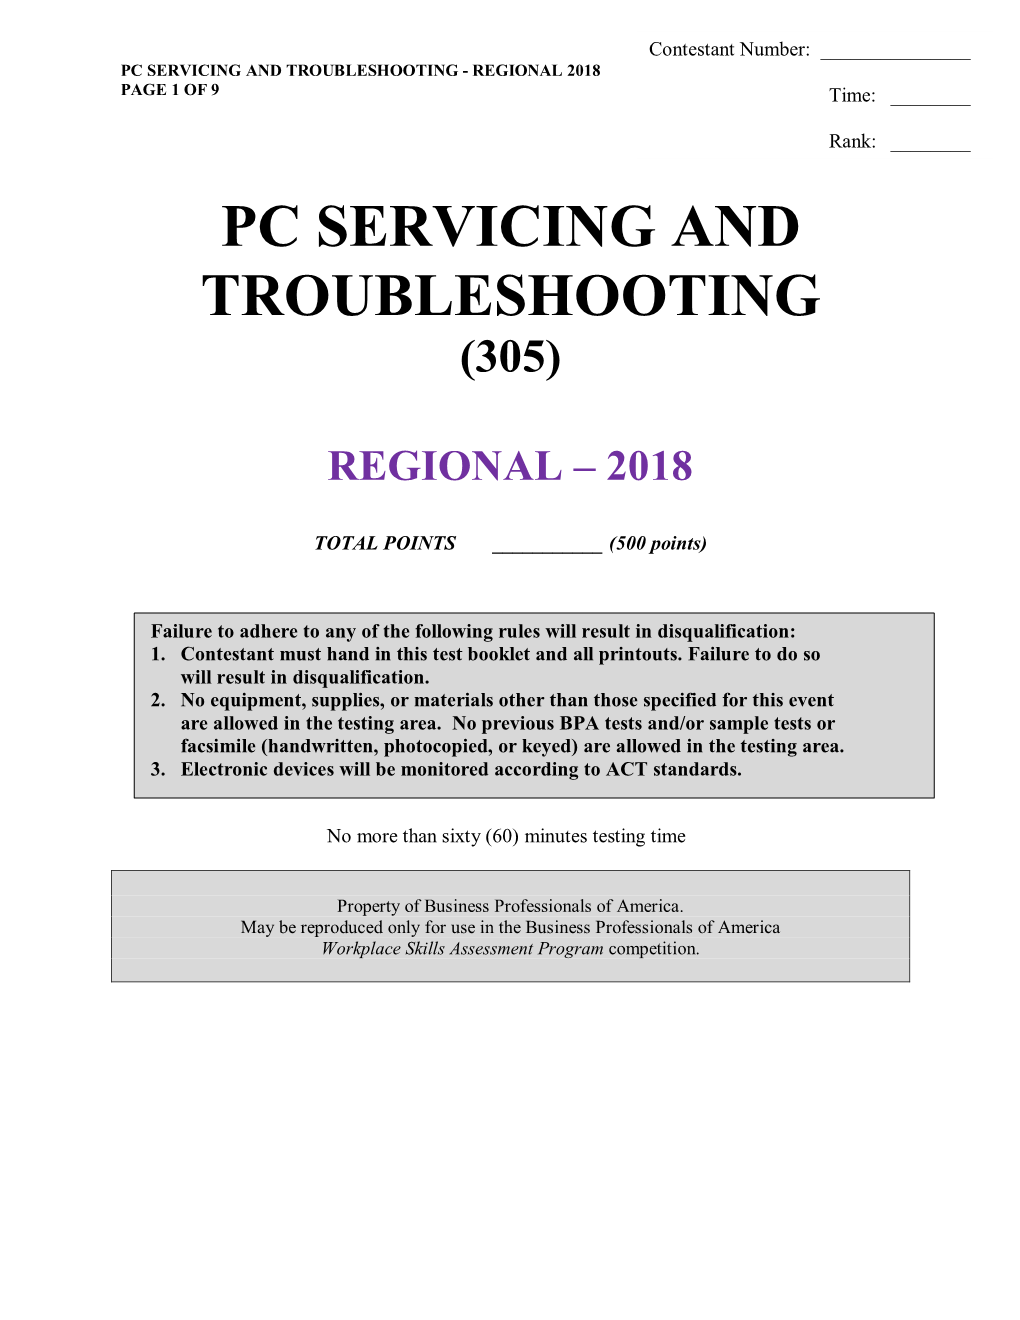 PC SERVICING and TROUBLESHOOTING - REGIONAL 2018 PAGE 1 of 9 Time: ______